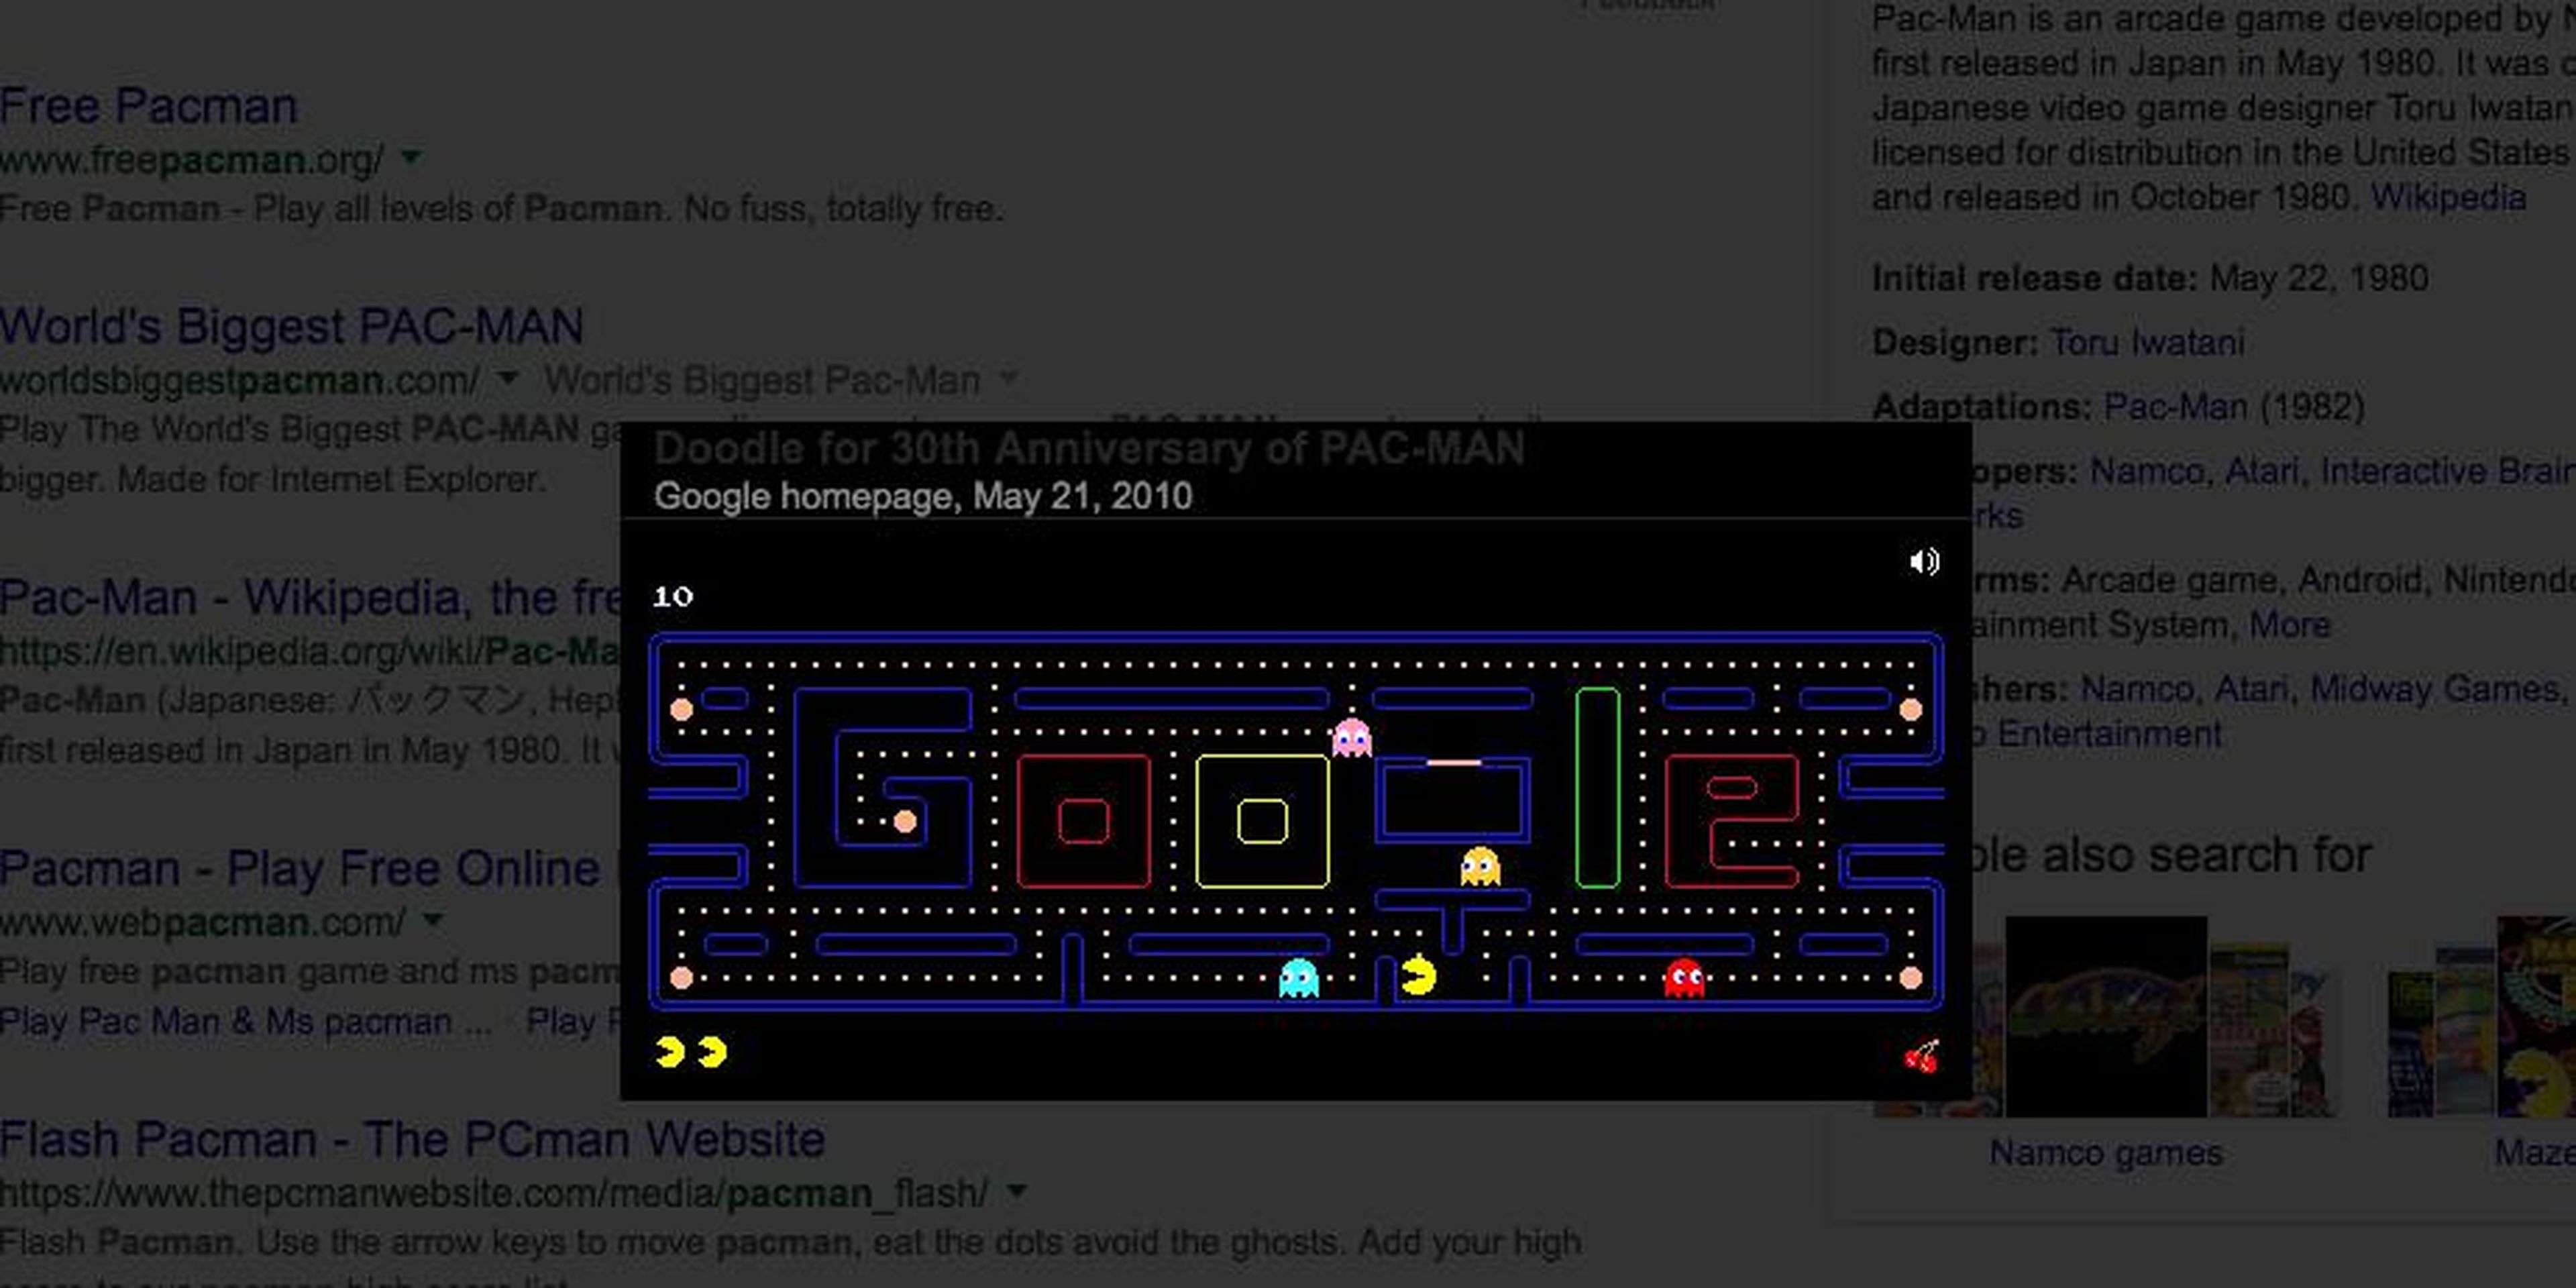 19. Googling “Pacman” will allow you to play the interactive game Google created for a Doodle celebrating the little yellow guy’s 30th anniversary back in 2010.